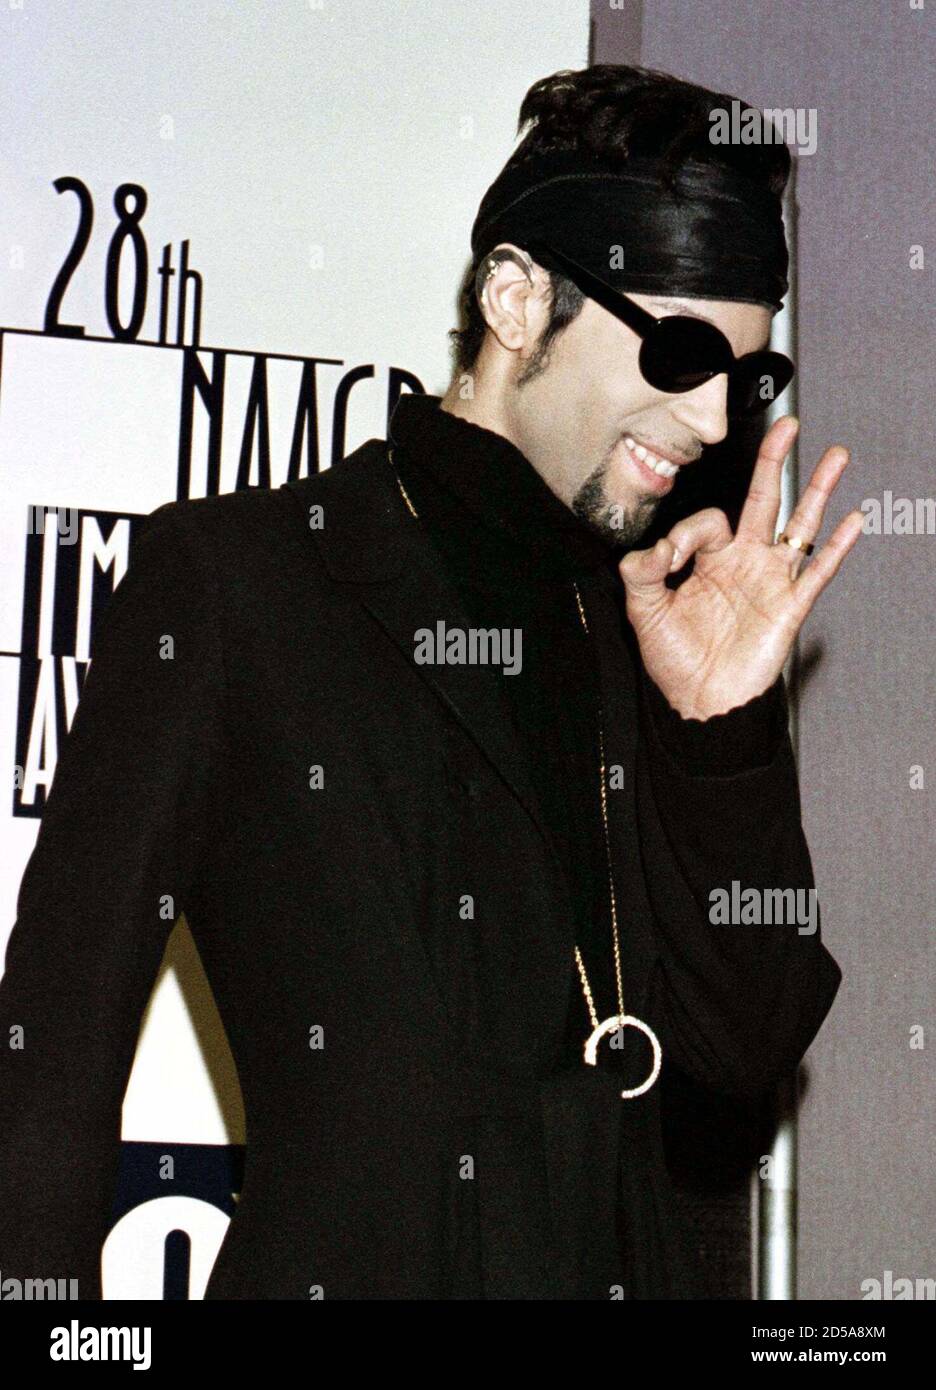 The Artist gestures after posing  for photographers February 8 at the National Association for the Advancement of Colored People (NAACP) 28th annual Image Awards in Pasadena,California. The Artist, formerly known as Prince, performed the opening musical number for the show and was presented with a Special Achievement Award. The Image Awards will be telecast February 27 on the Fox television Stock Photo